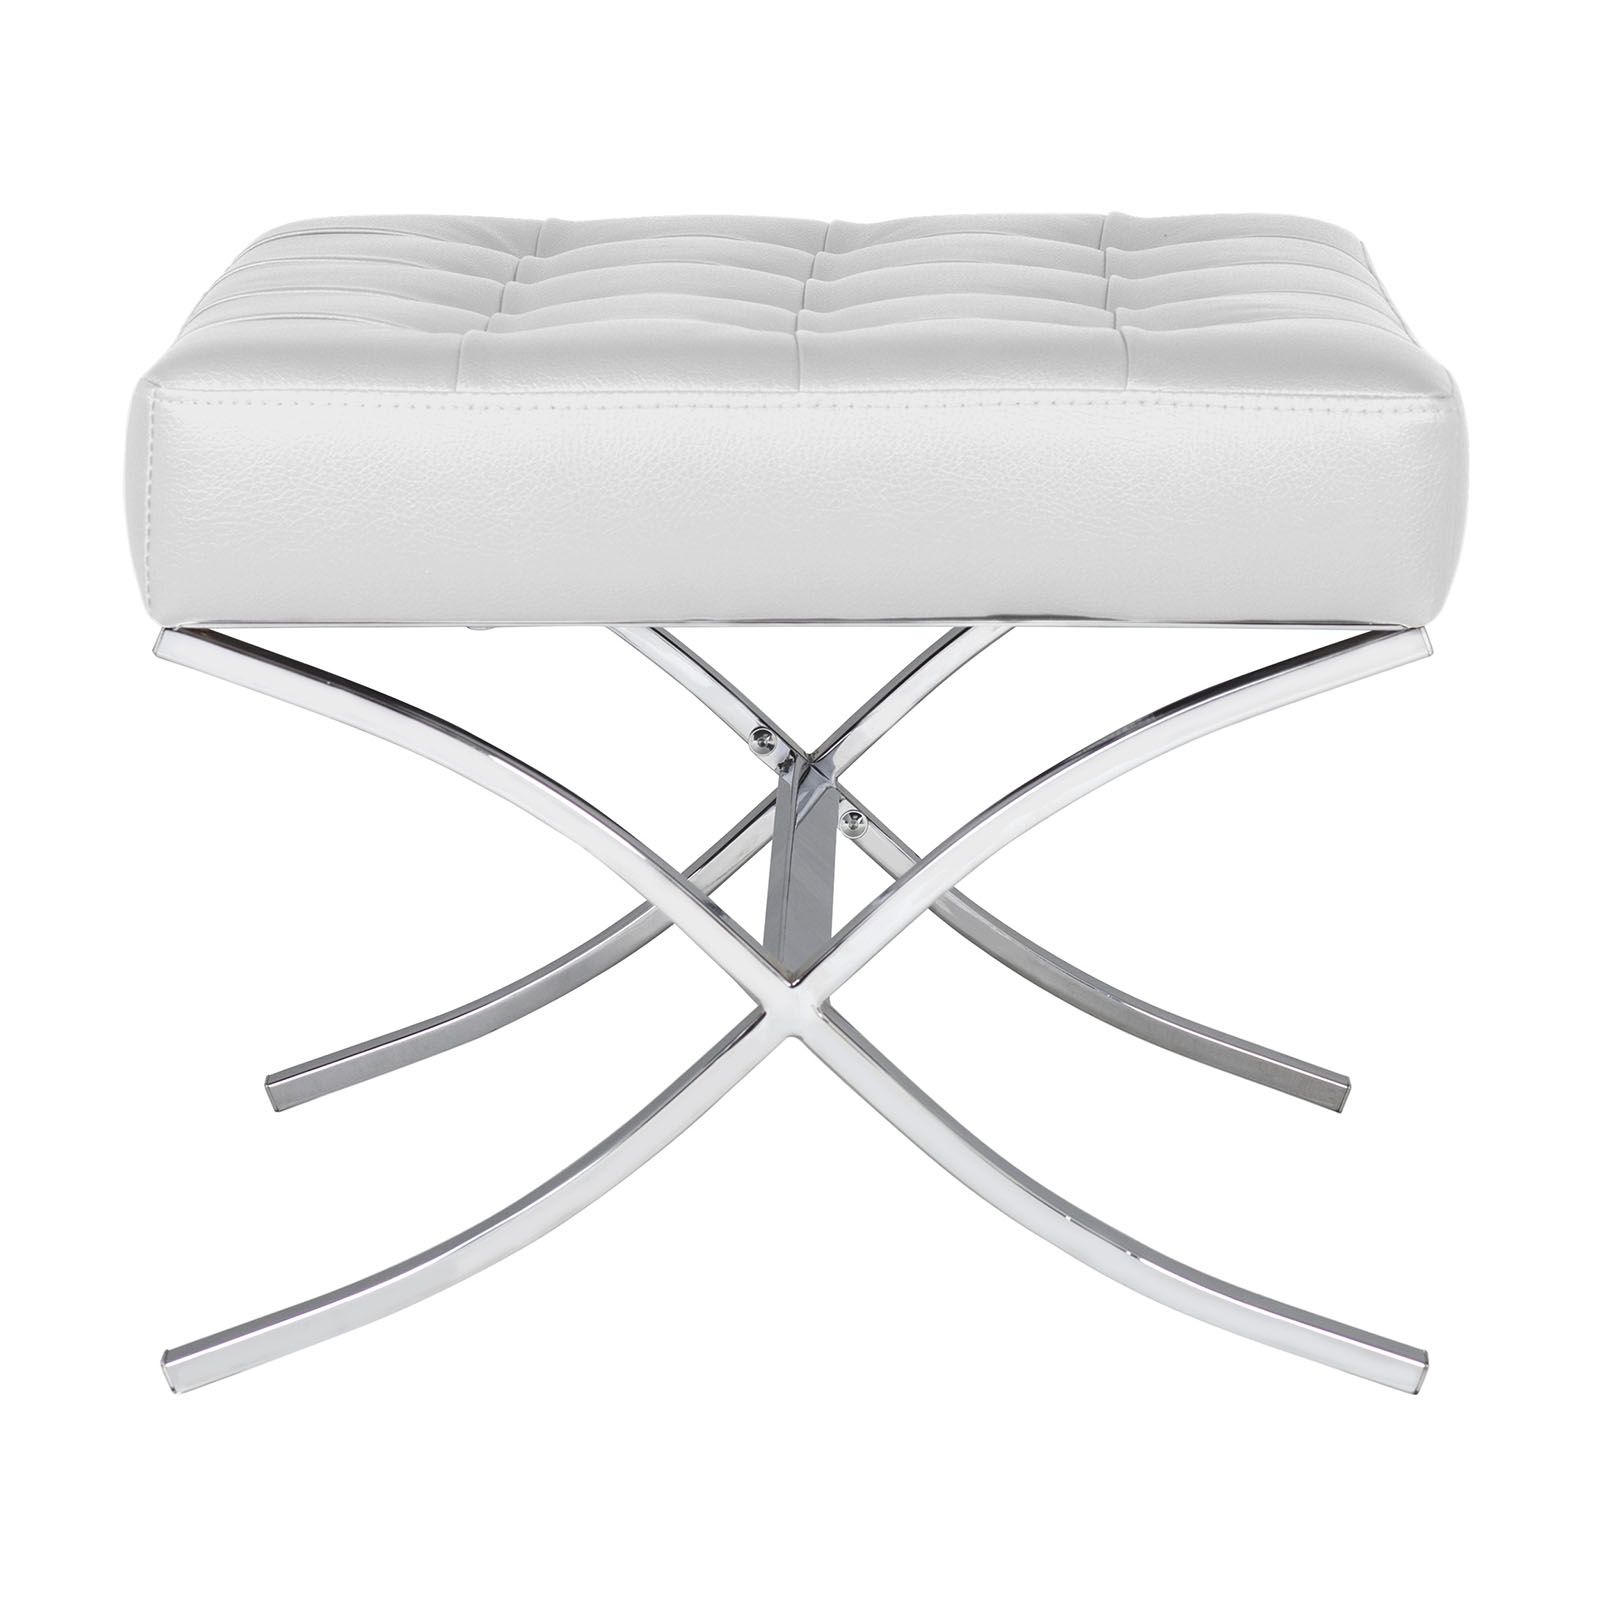 Atrium Bonded Leather Tufted Ottoman In White / Chrome – Item #70203 Within White Leather Ottomans (View 18 of 20)